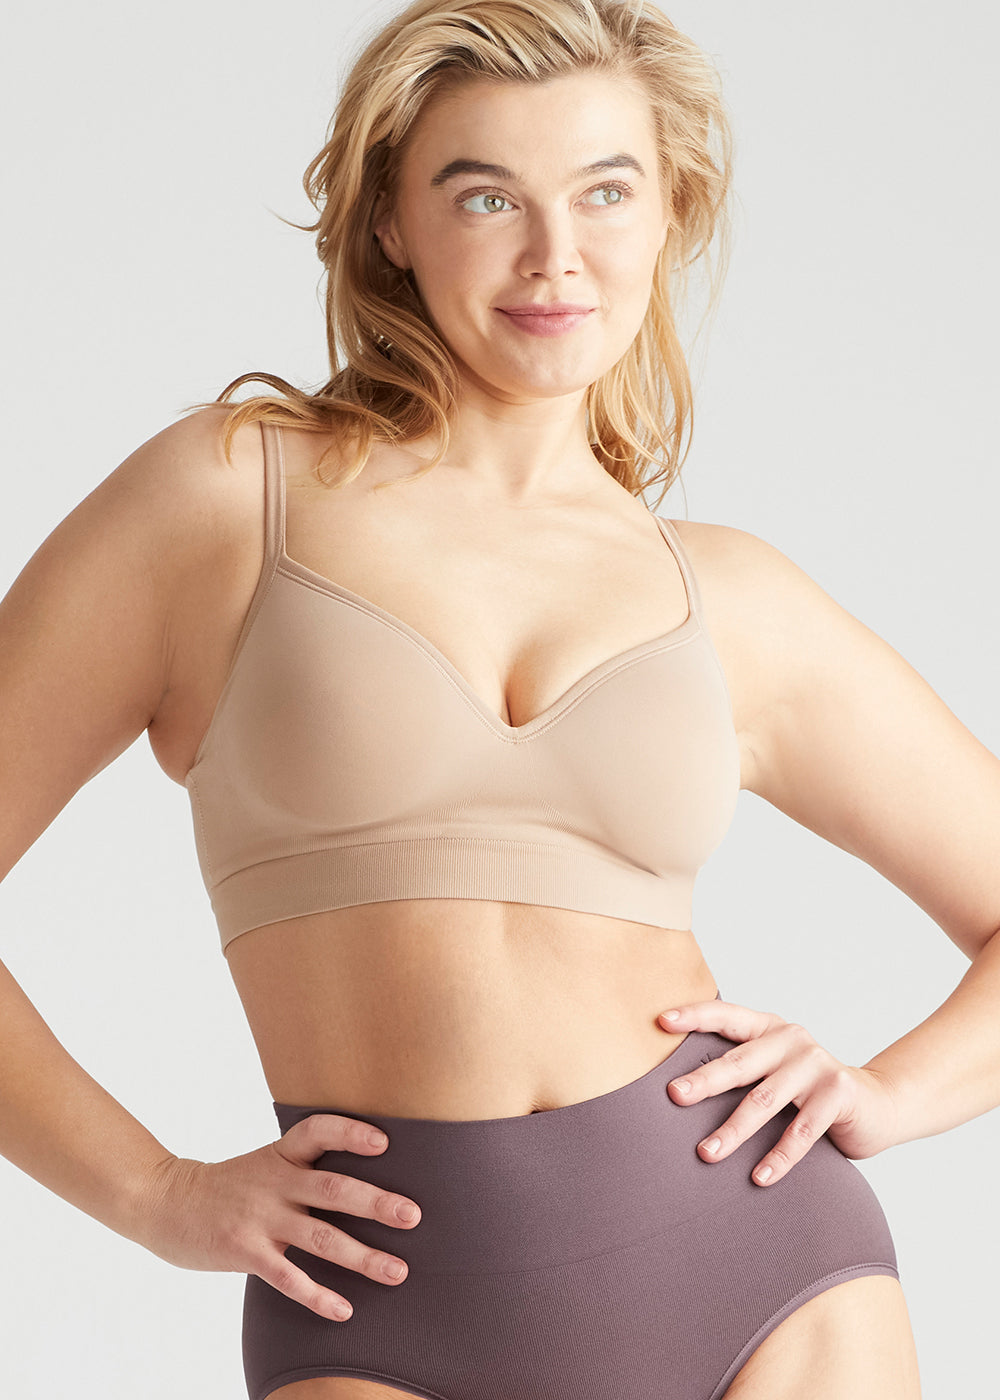 Yummie Bria Comfortably Curved Shaping Short Almond Shapewear YT5